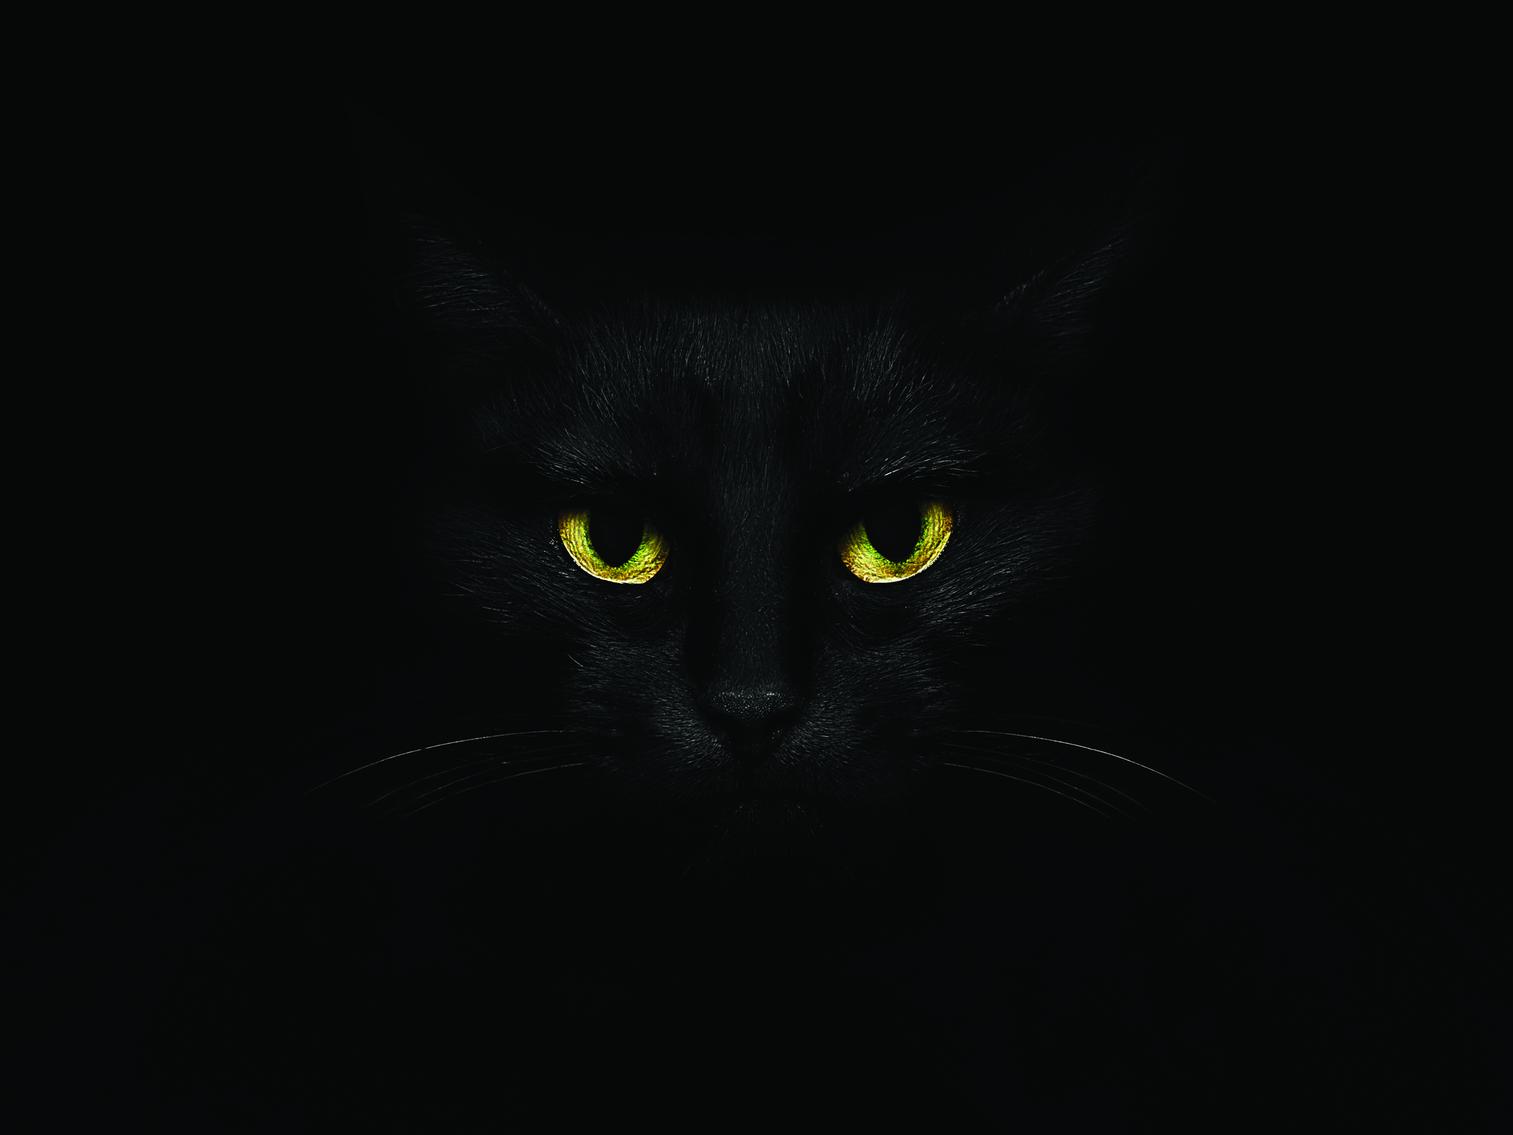 One night two teens in the Bleak Hall area saw a large black cat leap out of the darkness. After staring right at them, it jumped off into the woodland.